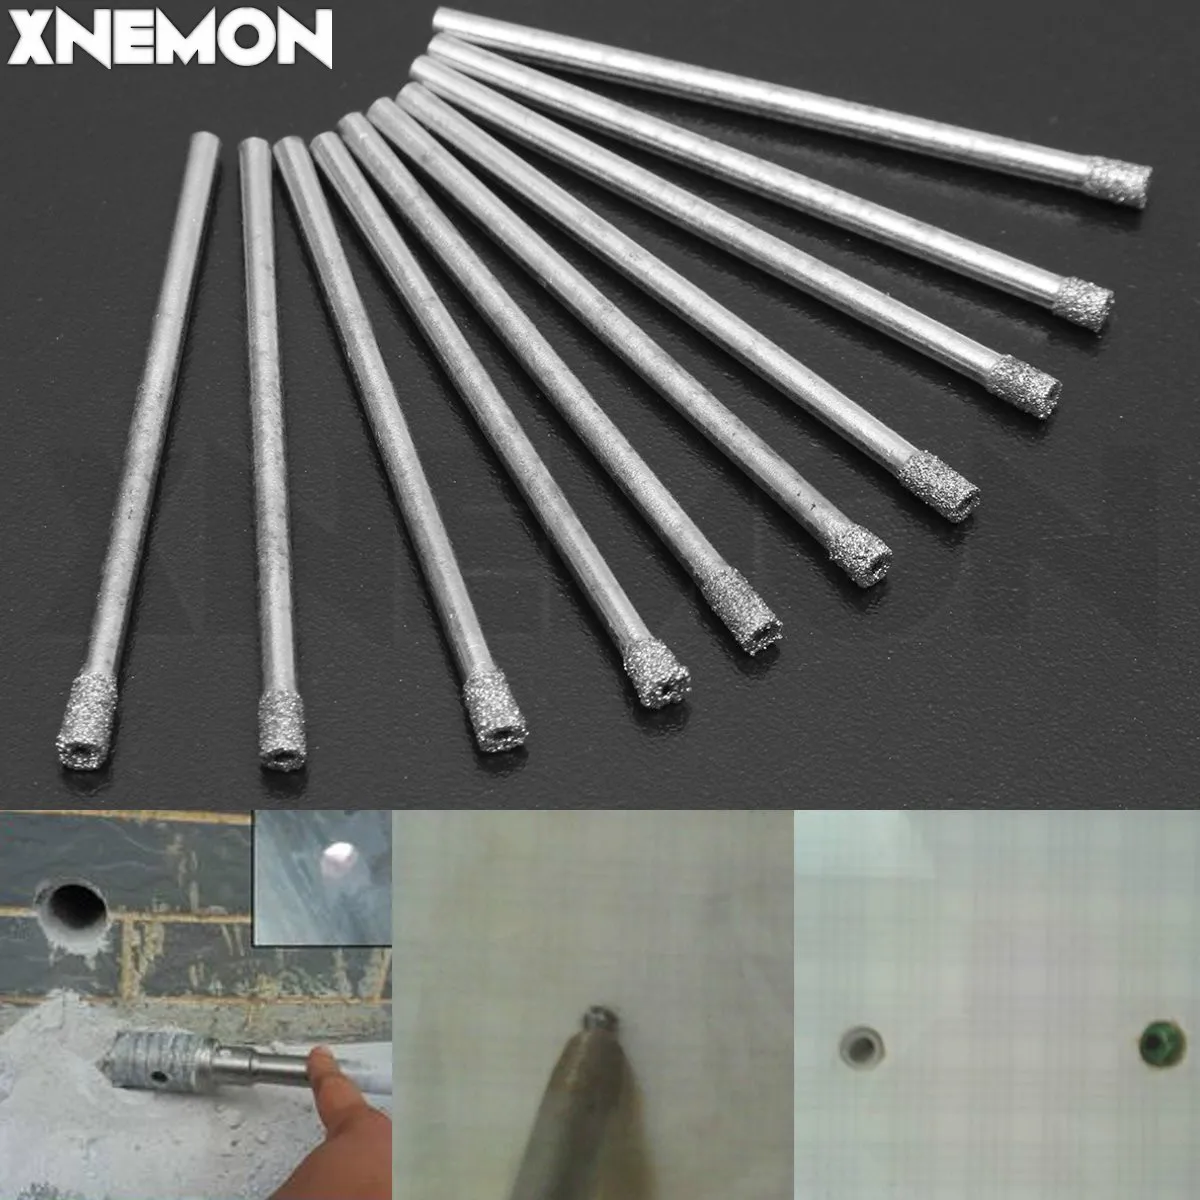 

XNEMON 10pcs 5mm 3/16" Diamond Coated Core Drill Bit Carborundum Use in Drill Hole on Glass, Marble, Tile or Granite.